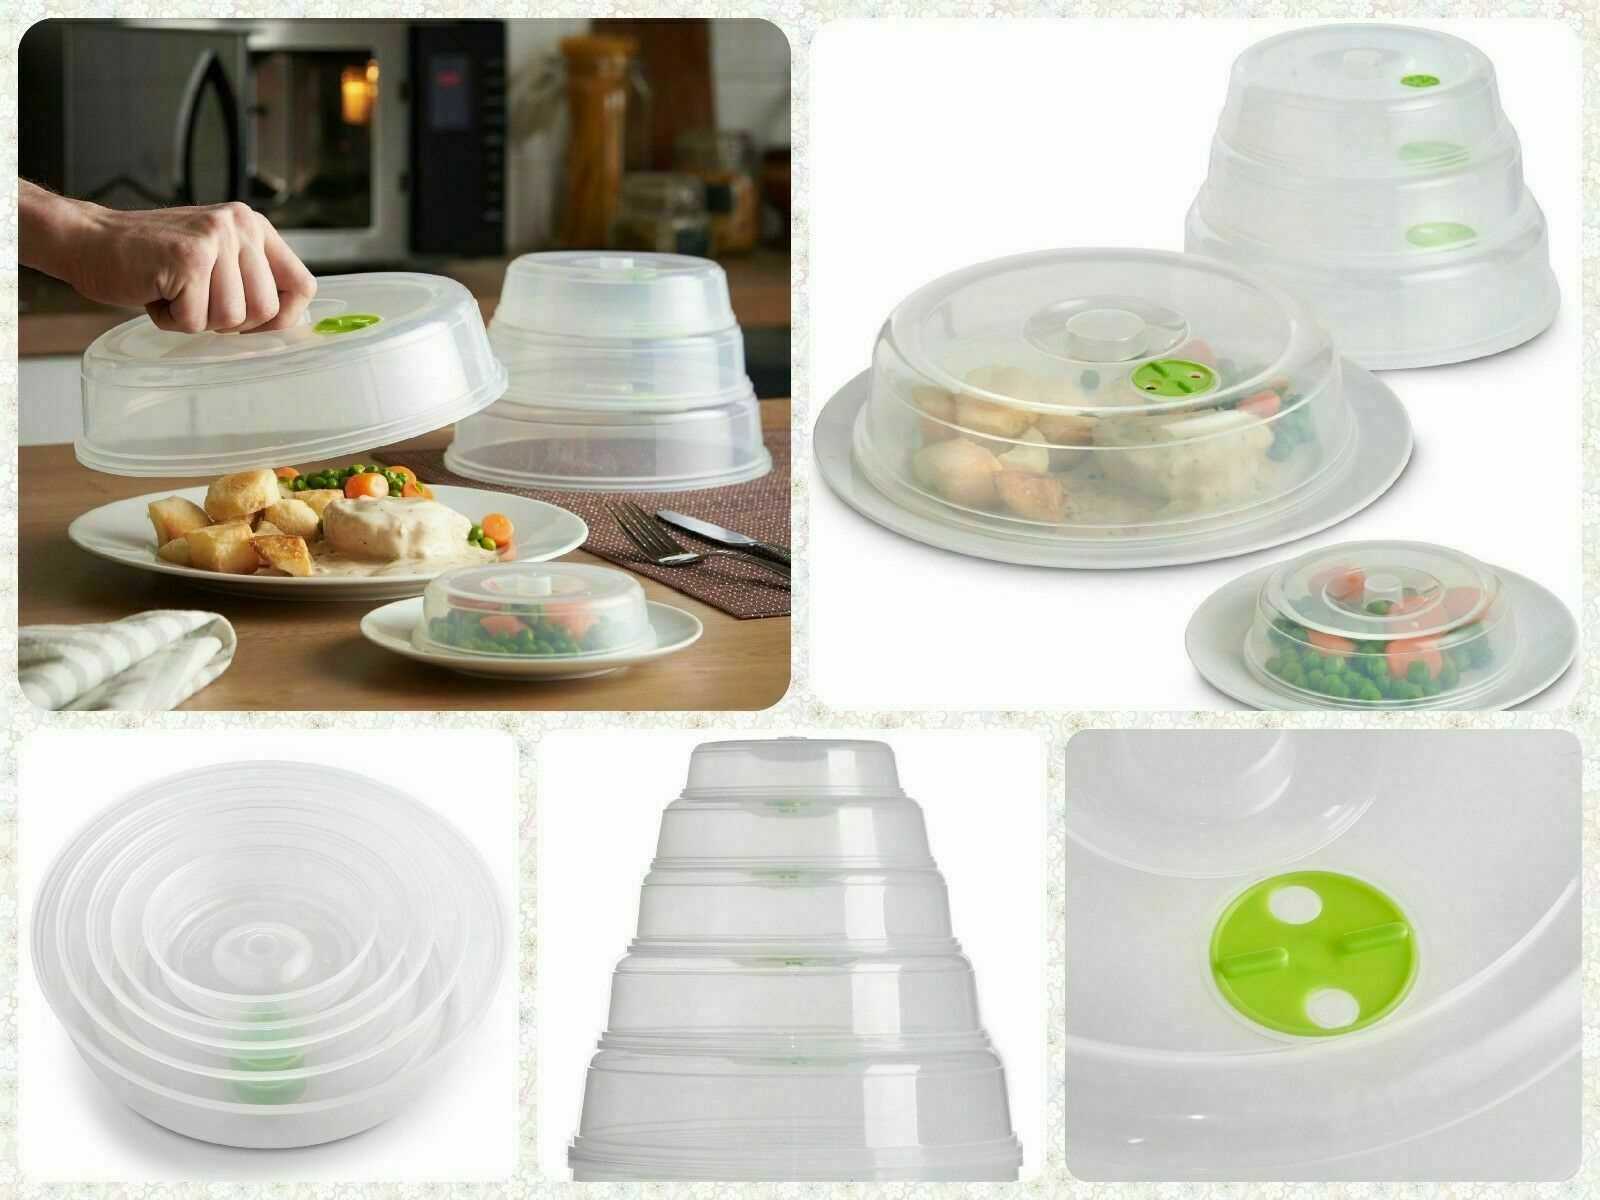 Clear Set of 5 Ventilated Microwave Food Plates Covers Lids Dishwasher Safe Clear